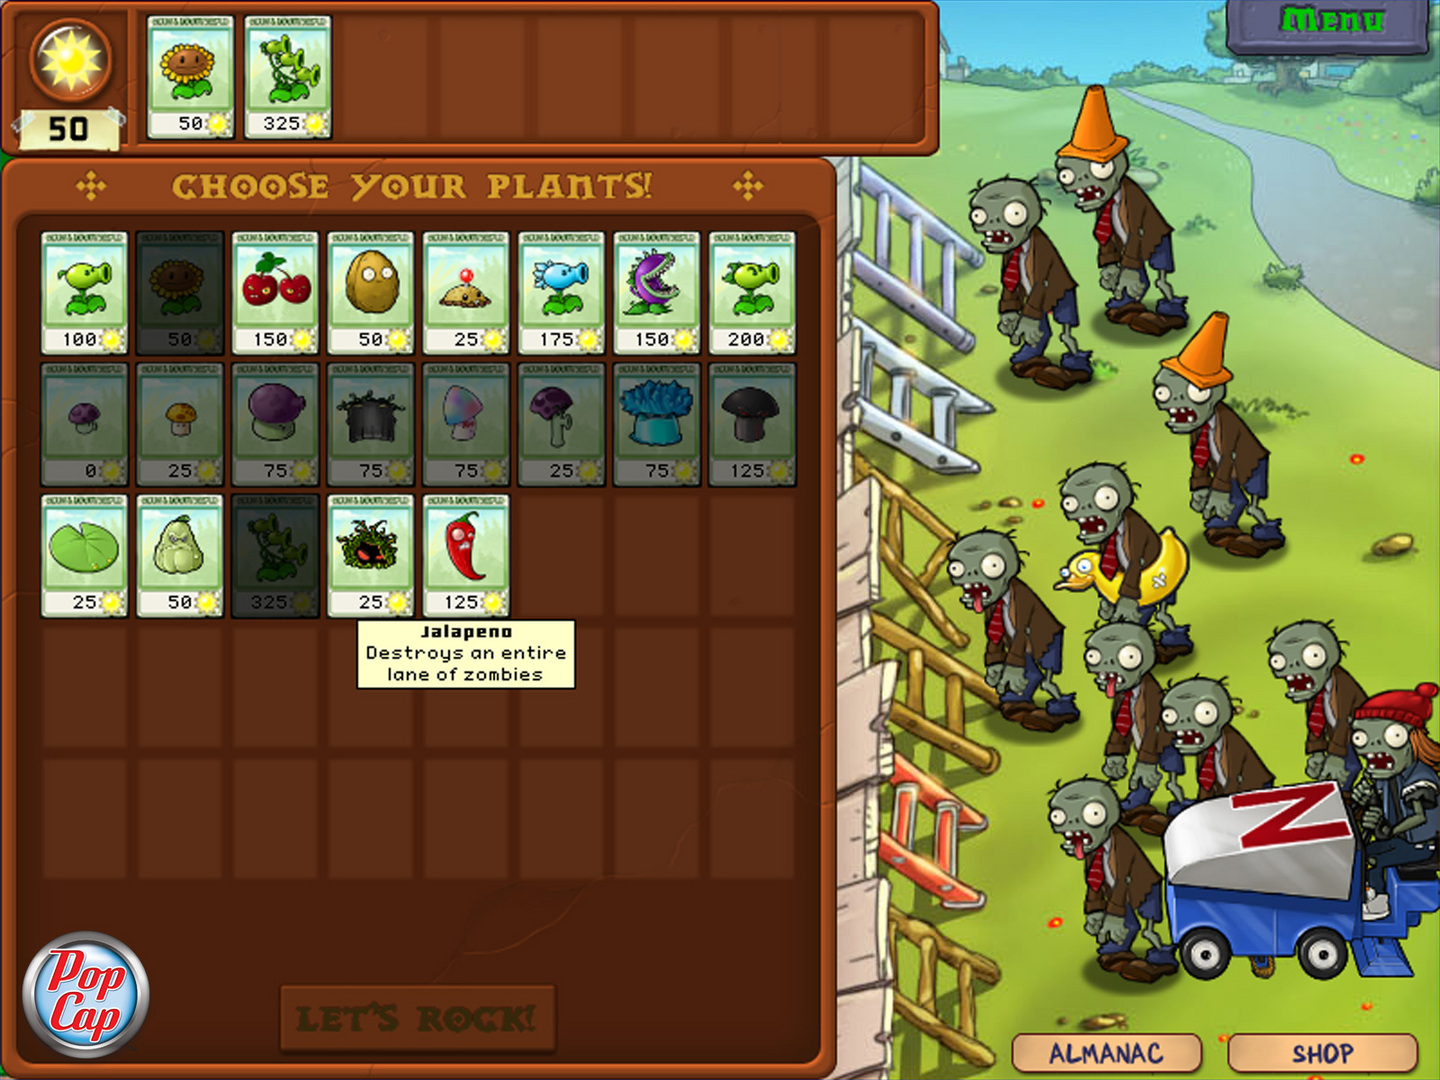 PLANTS VS ZOMBIES - Play online free at